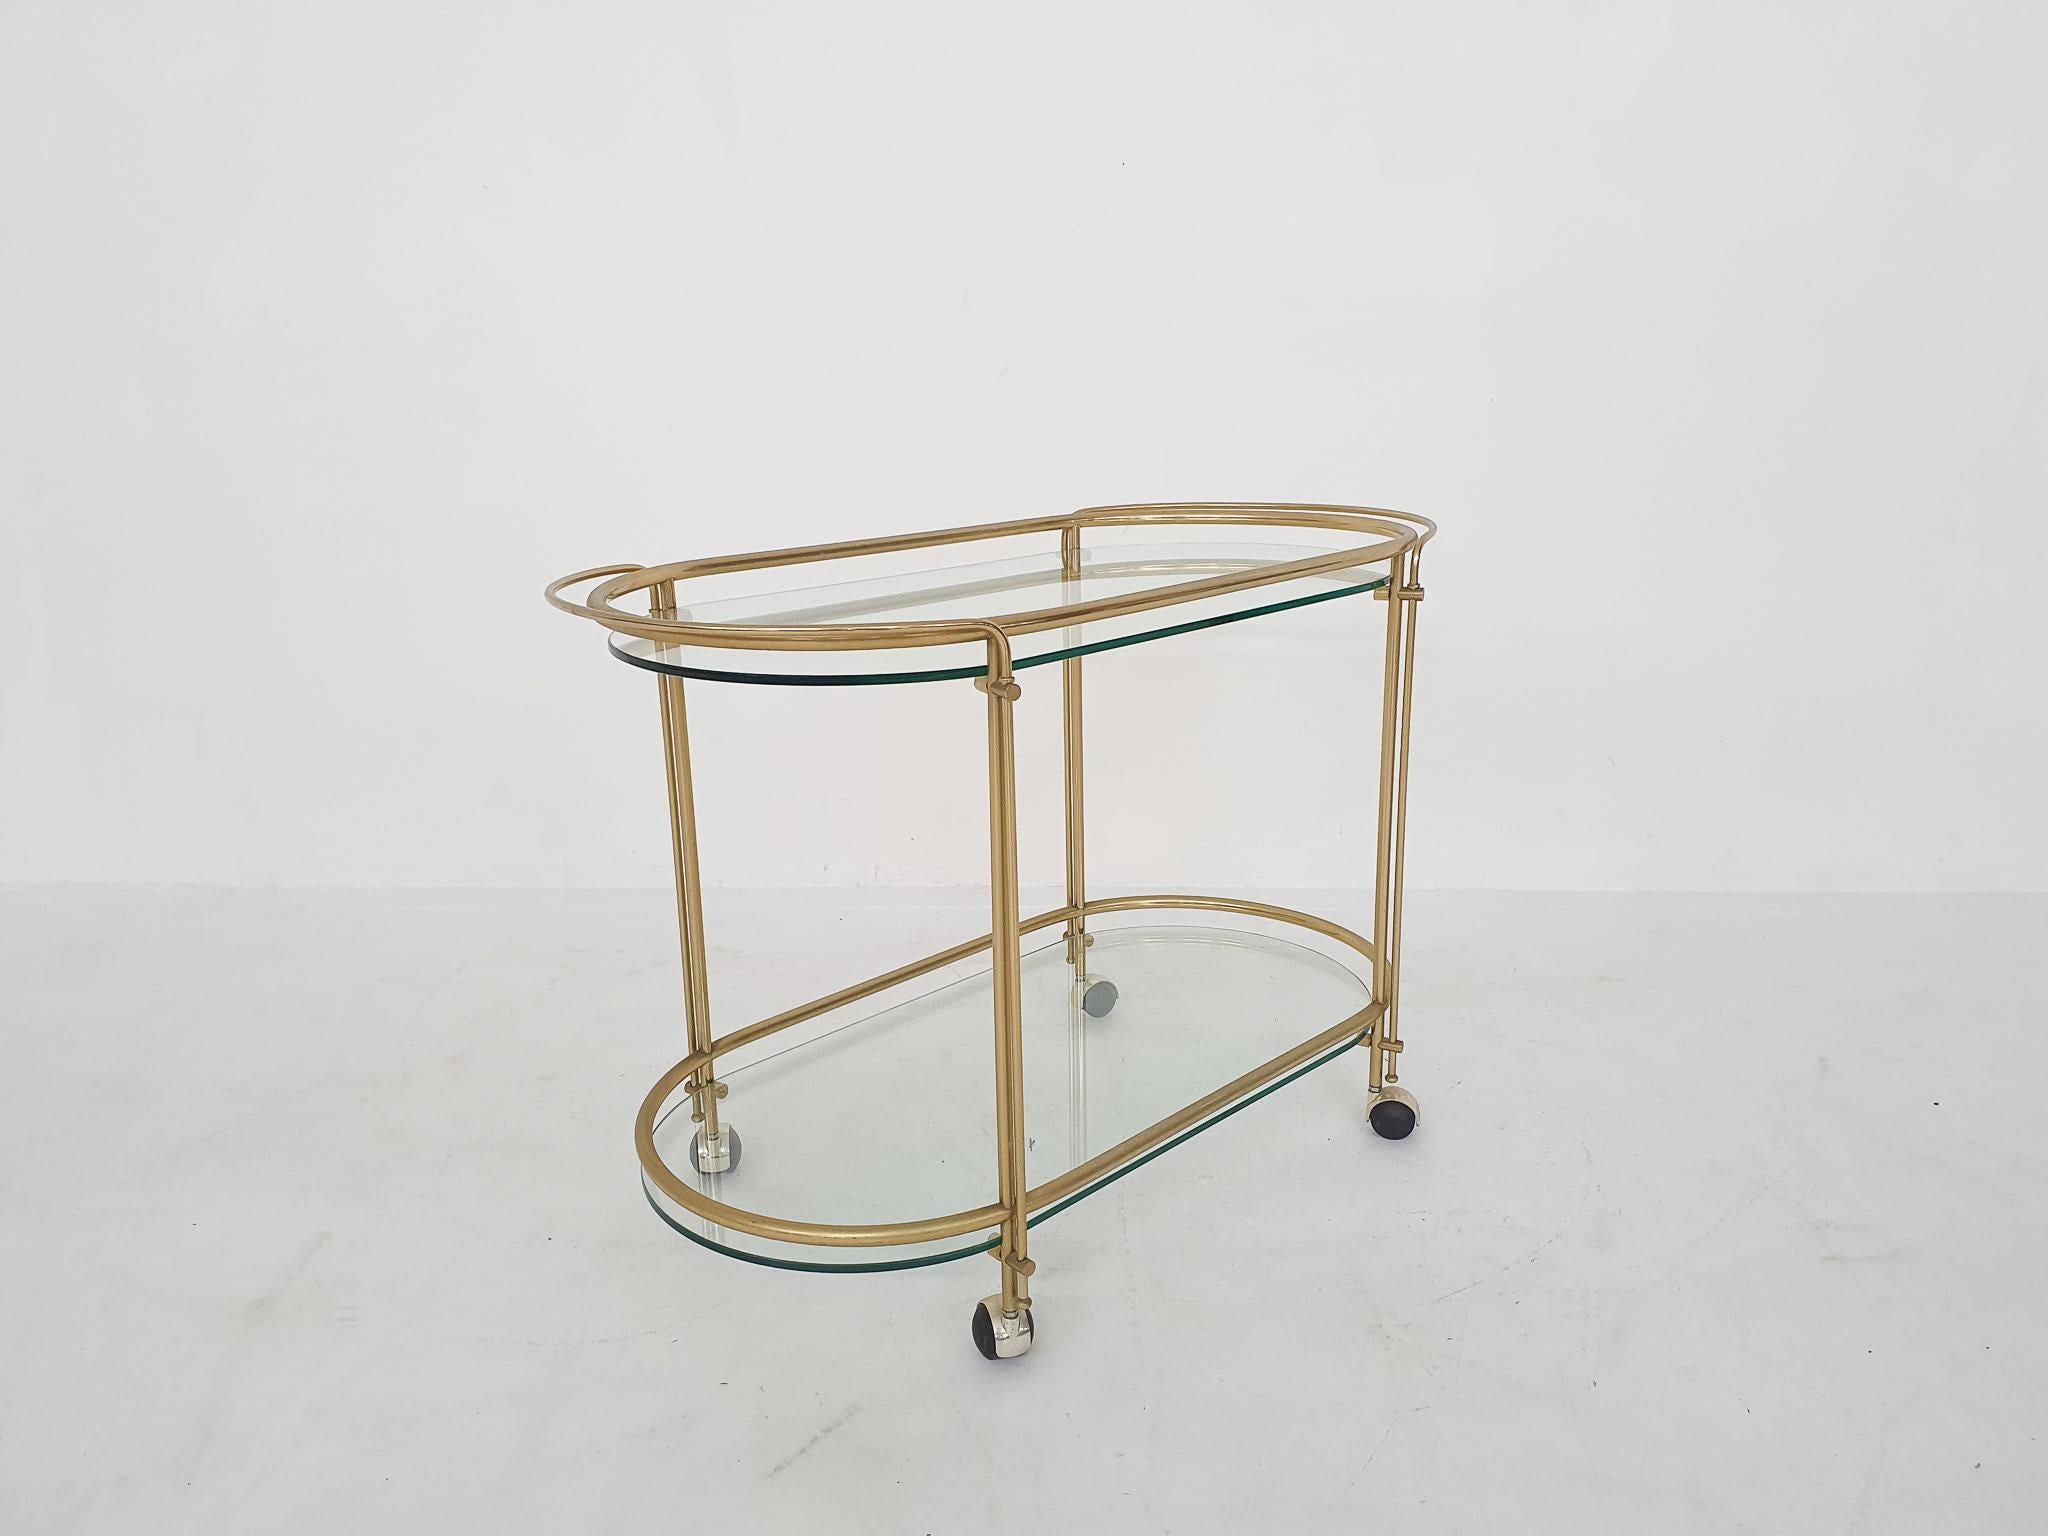 Late 20th Century Mid-Century Modern Glass and Gold Serving Trolley or Bar Cart, 1970's